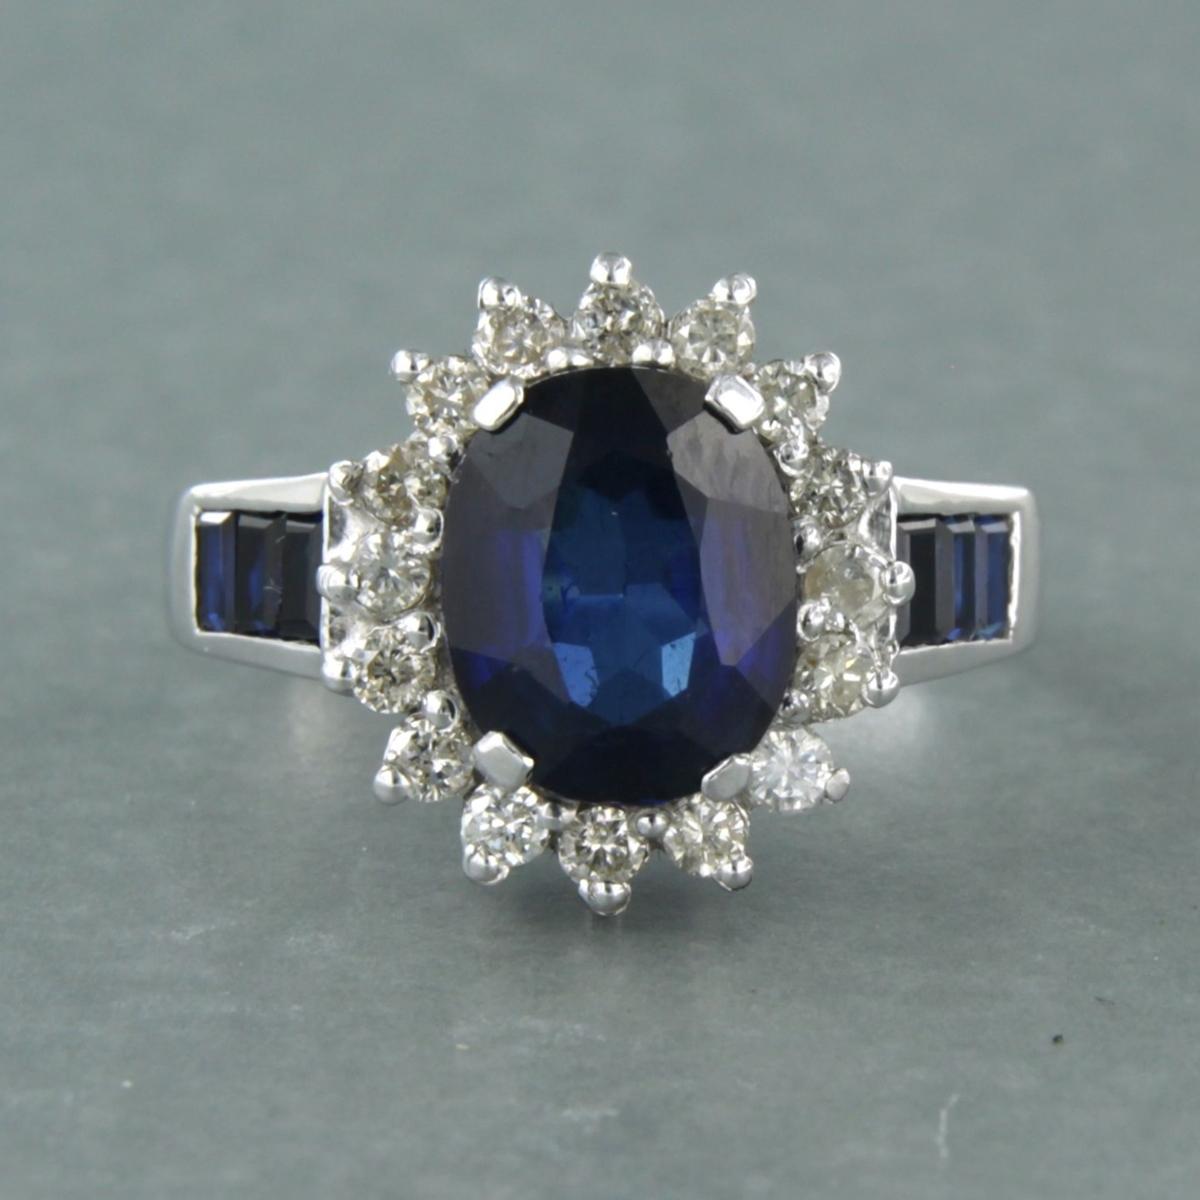 18k white gold ring set with sapphire up to 3.50 ct and diamonds tot. approx. 0.50 ct H-I SI - ringsize U.S. 7.5 - EU. 17.75(56) 

Detailed description

The head of the ring is 1.5 cm wide and 6.8 mm high

ring size U.S. 7.5 - EU. 17.75(56). We can